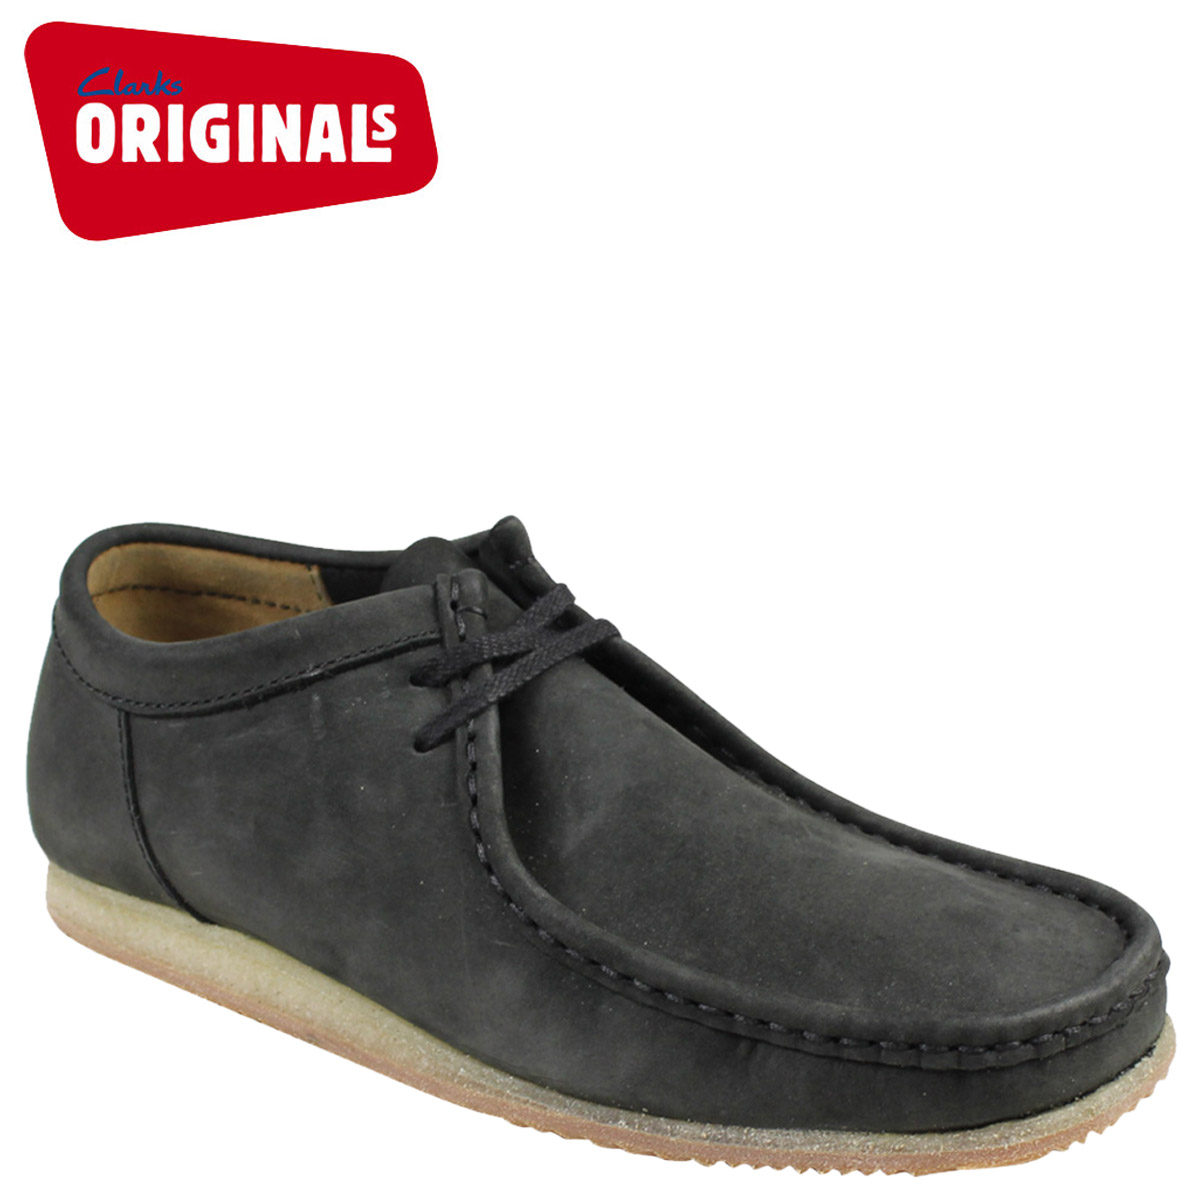 shoes similar to clarks wallabees